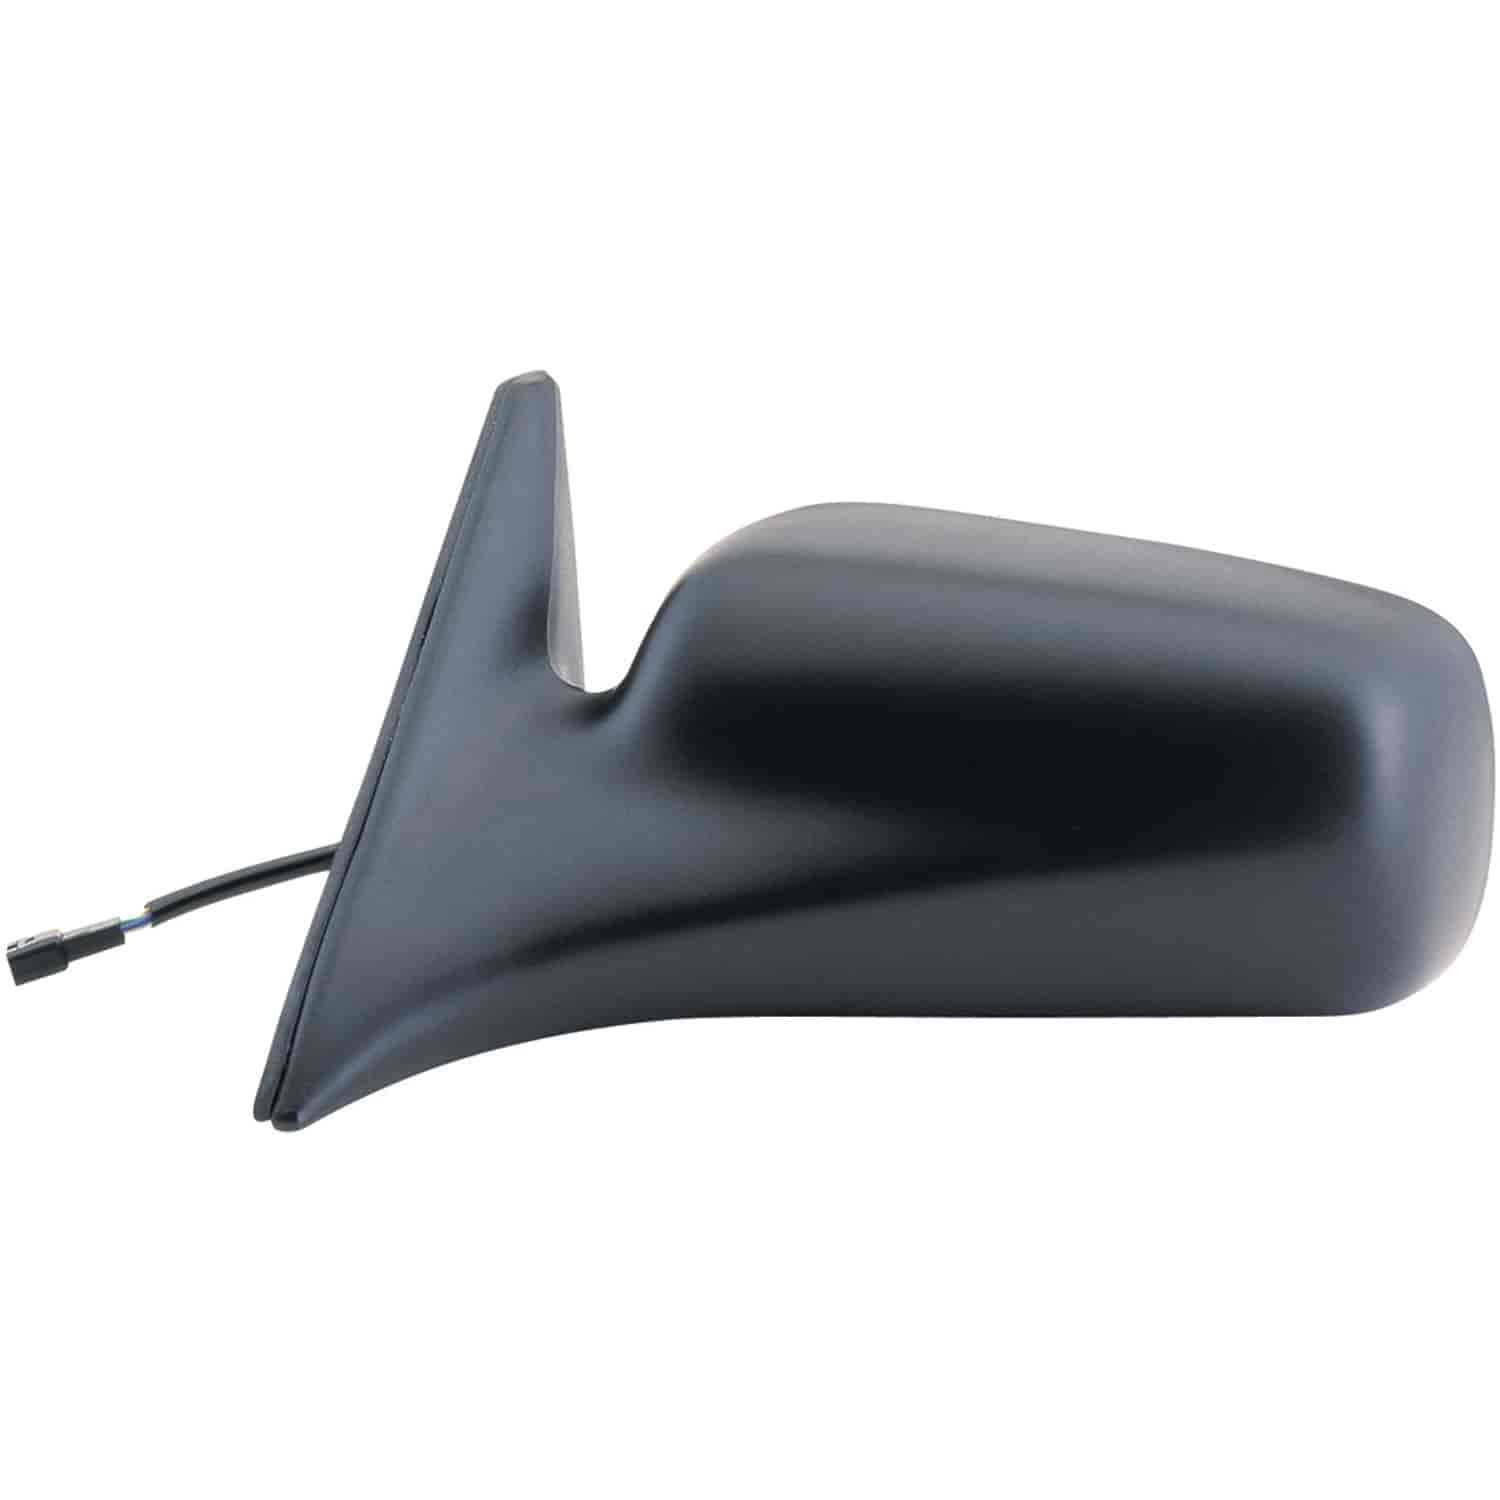 OEM Style Replacement mirror for 89-90 Toyota Camry Sedan driver side mirror tested to fit and funct